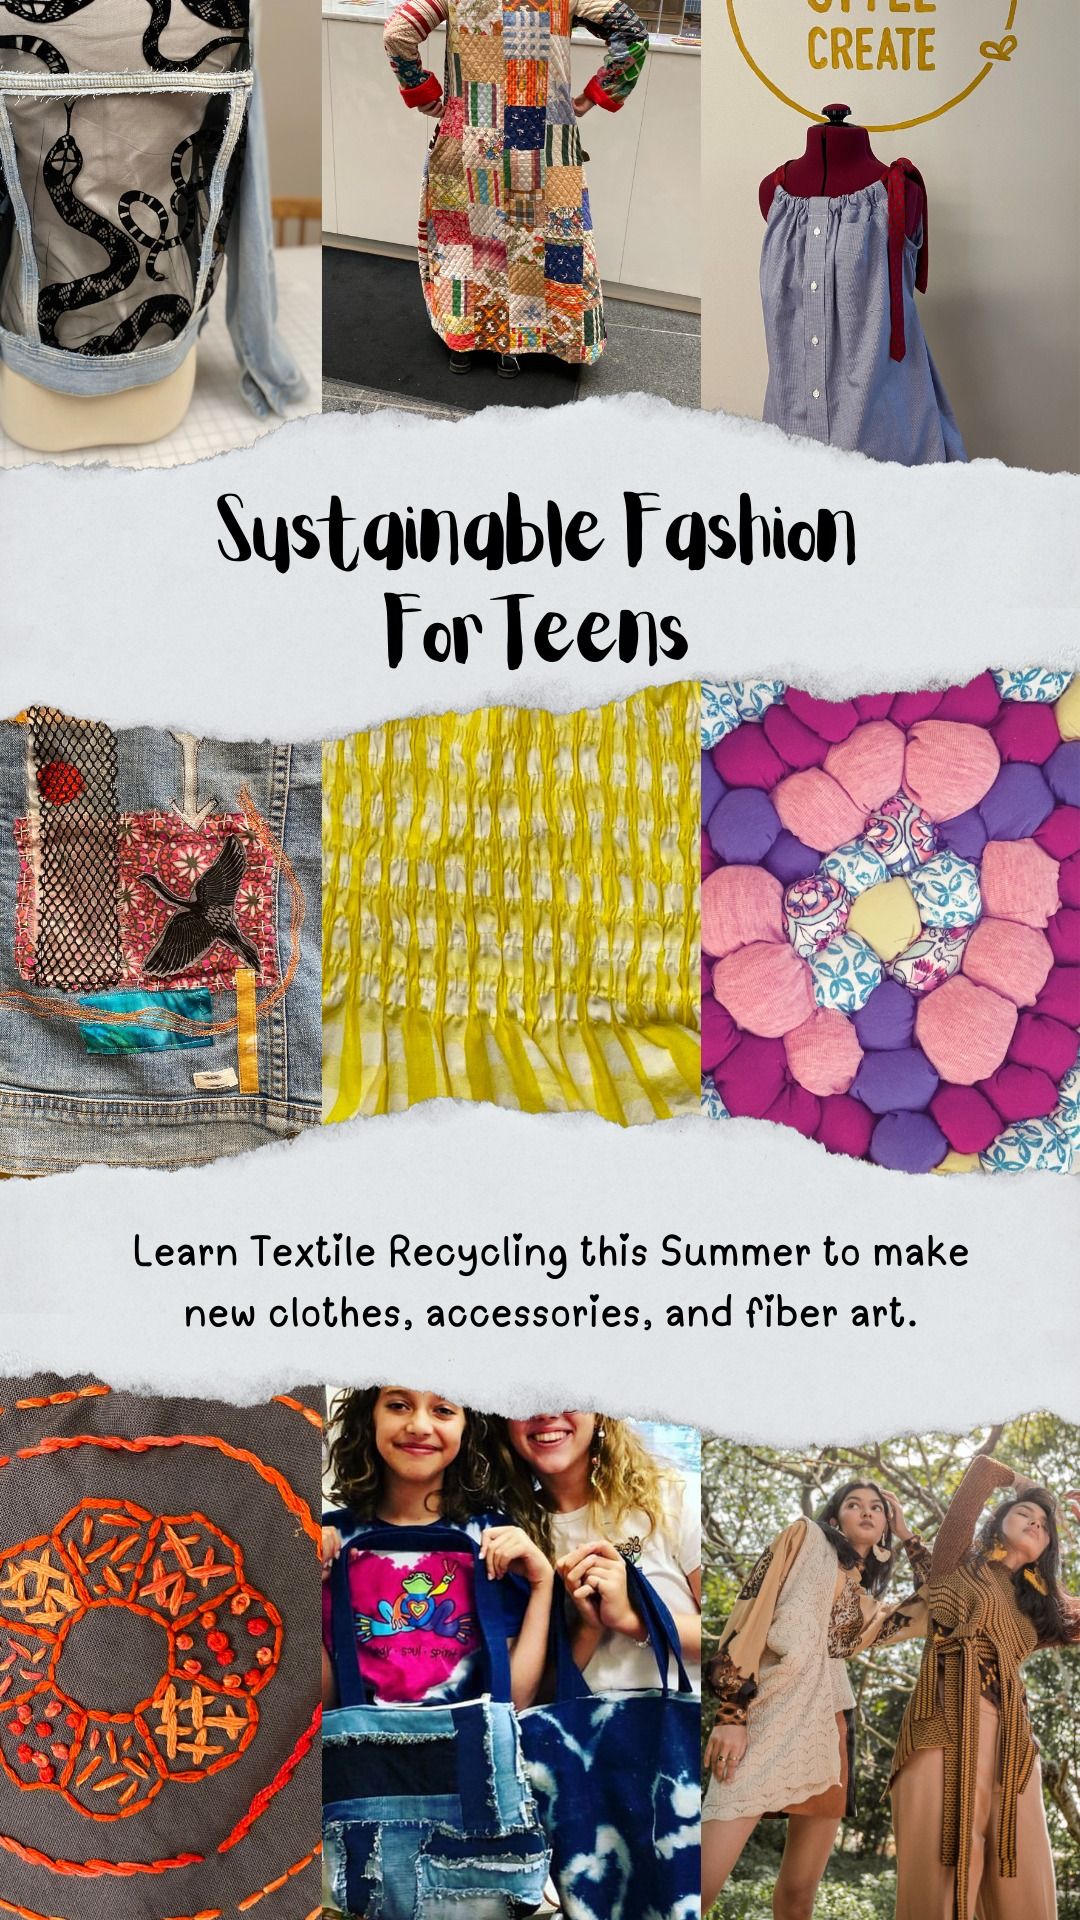 Sustainable Fashion Workshop for Teens